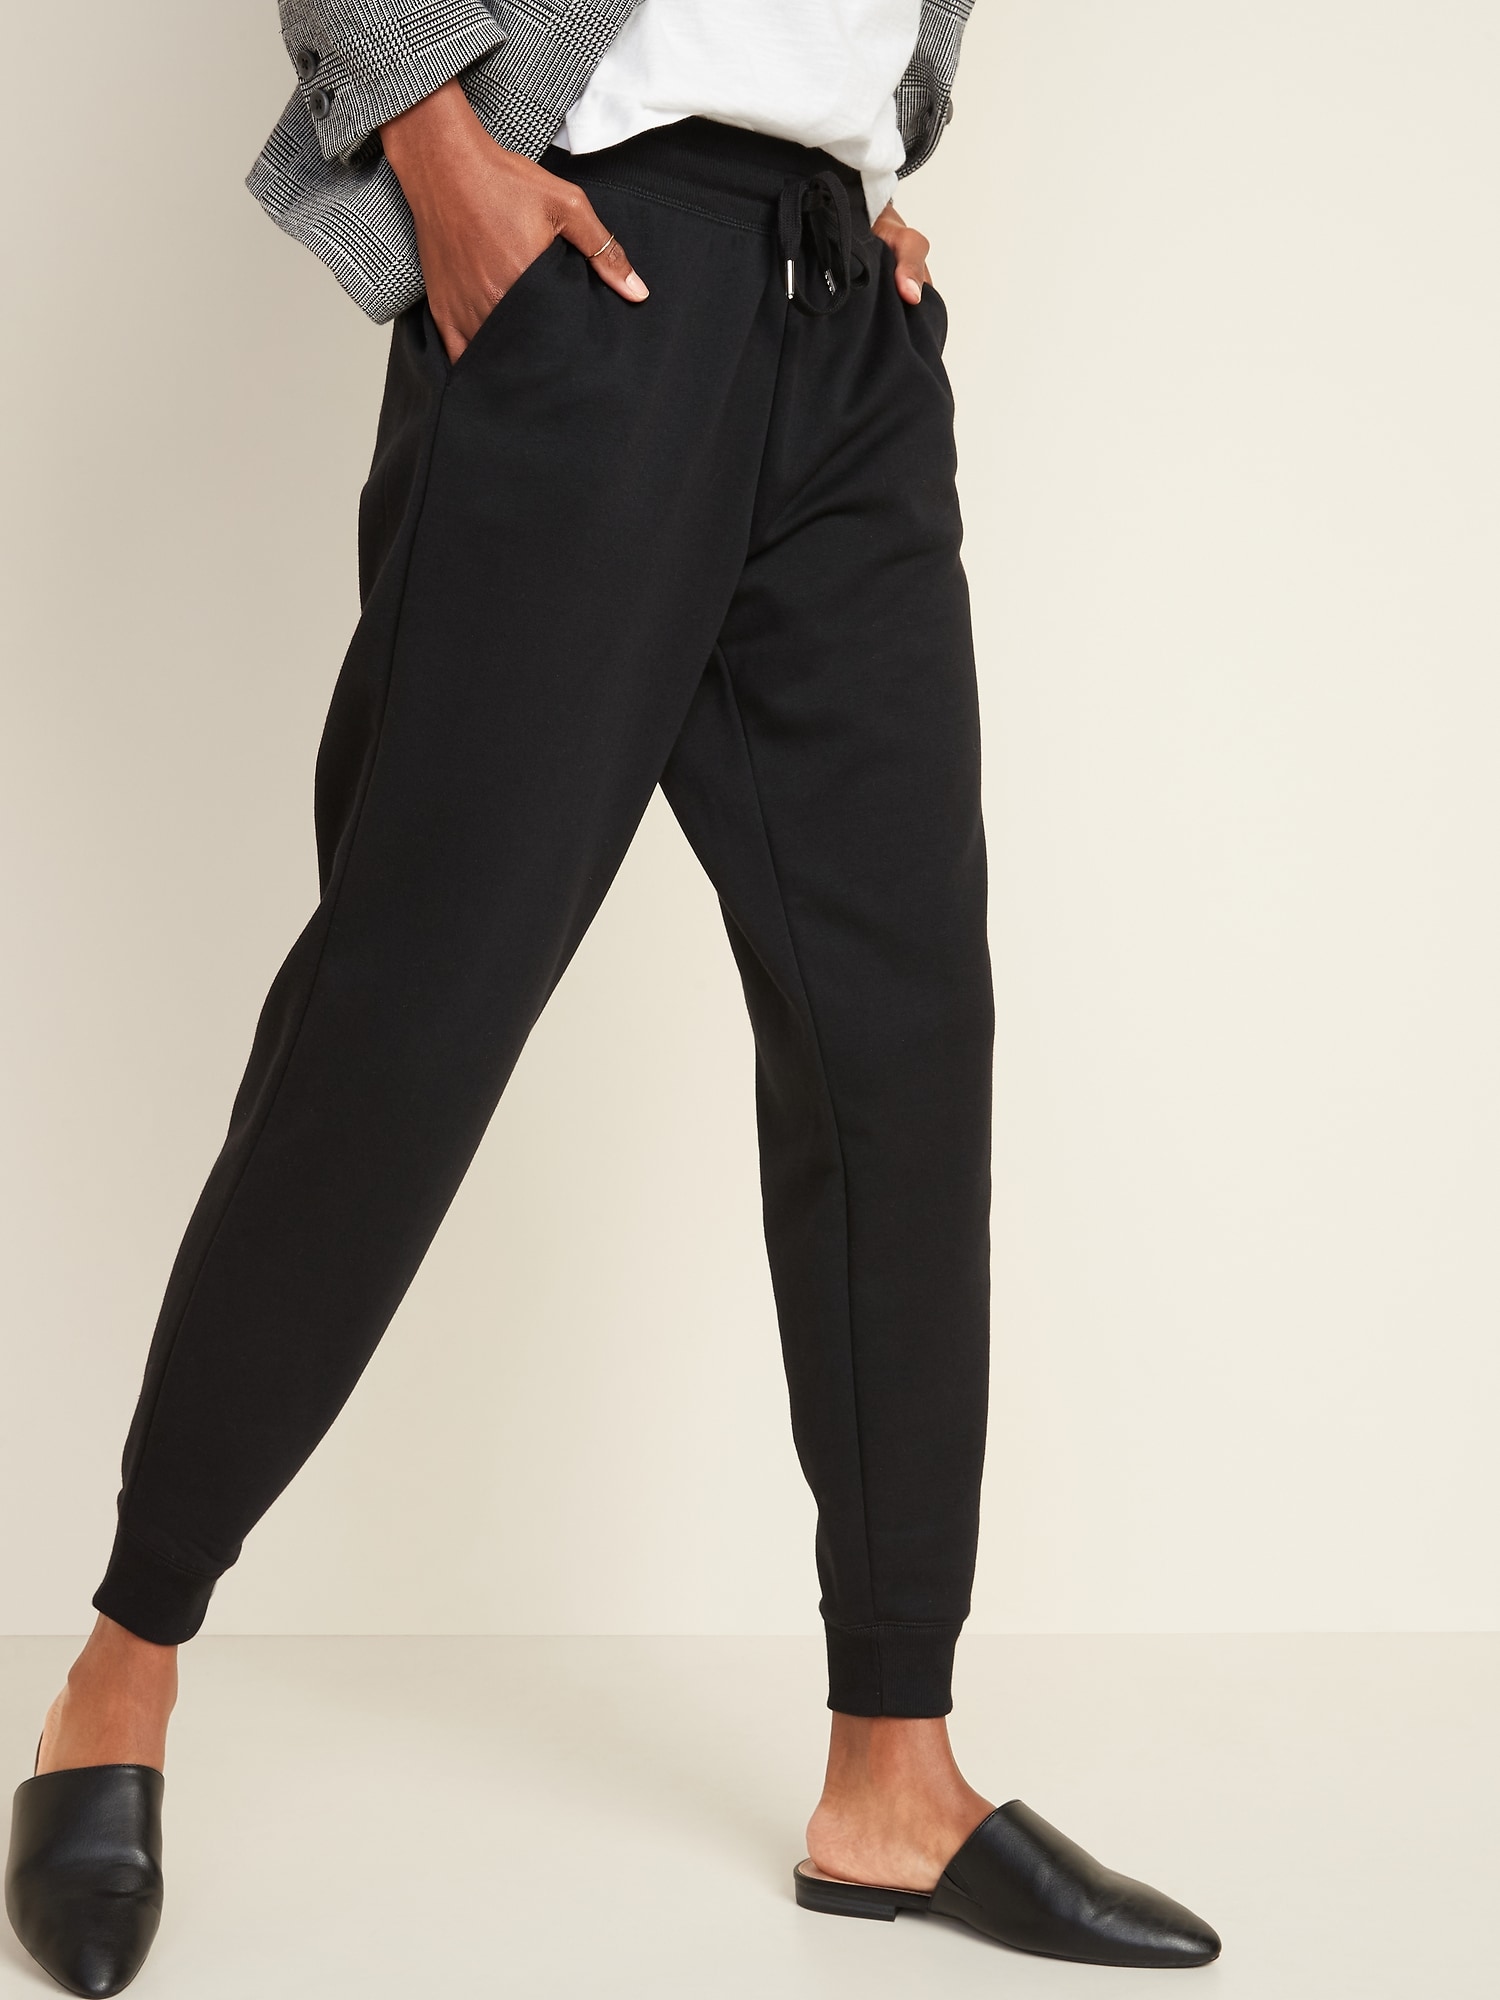 Mid-Rise Vintage Street Joggers Old for Navy | Women